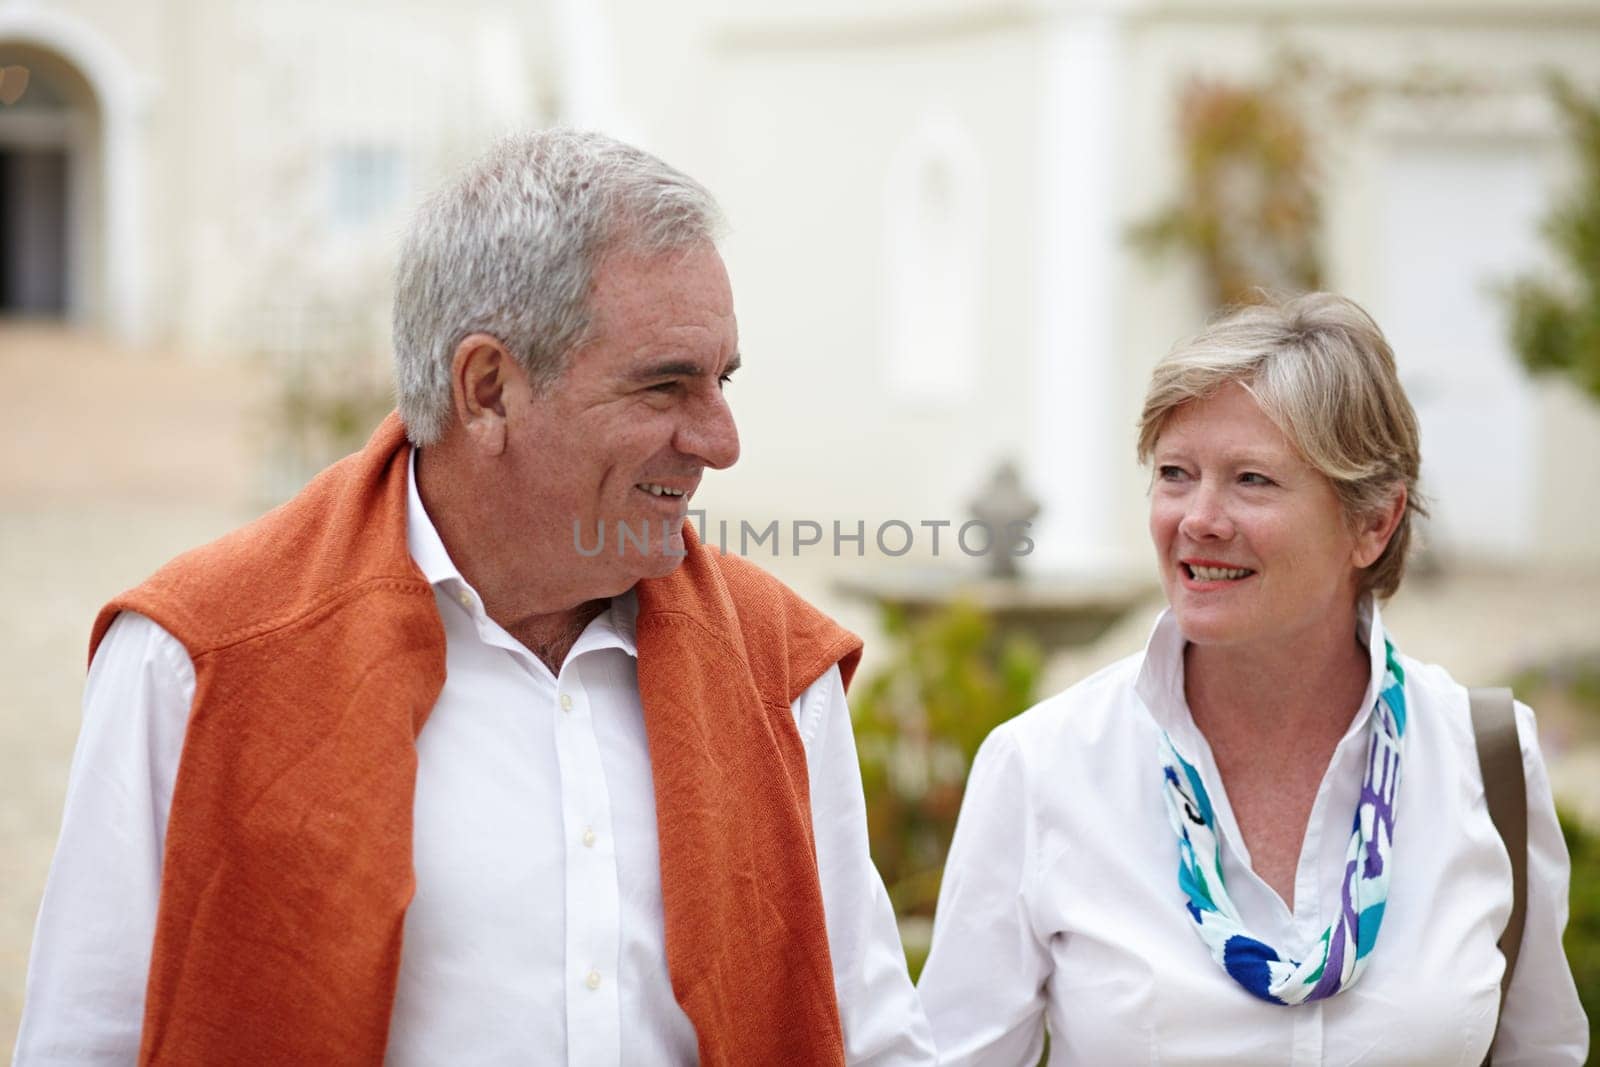 Smile, conversation and a senior couple in the city for a retirement holiday, travel and happiness. Happy, love and an elderly man and woman walking in an old town or hotel during a vacation together.